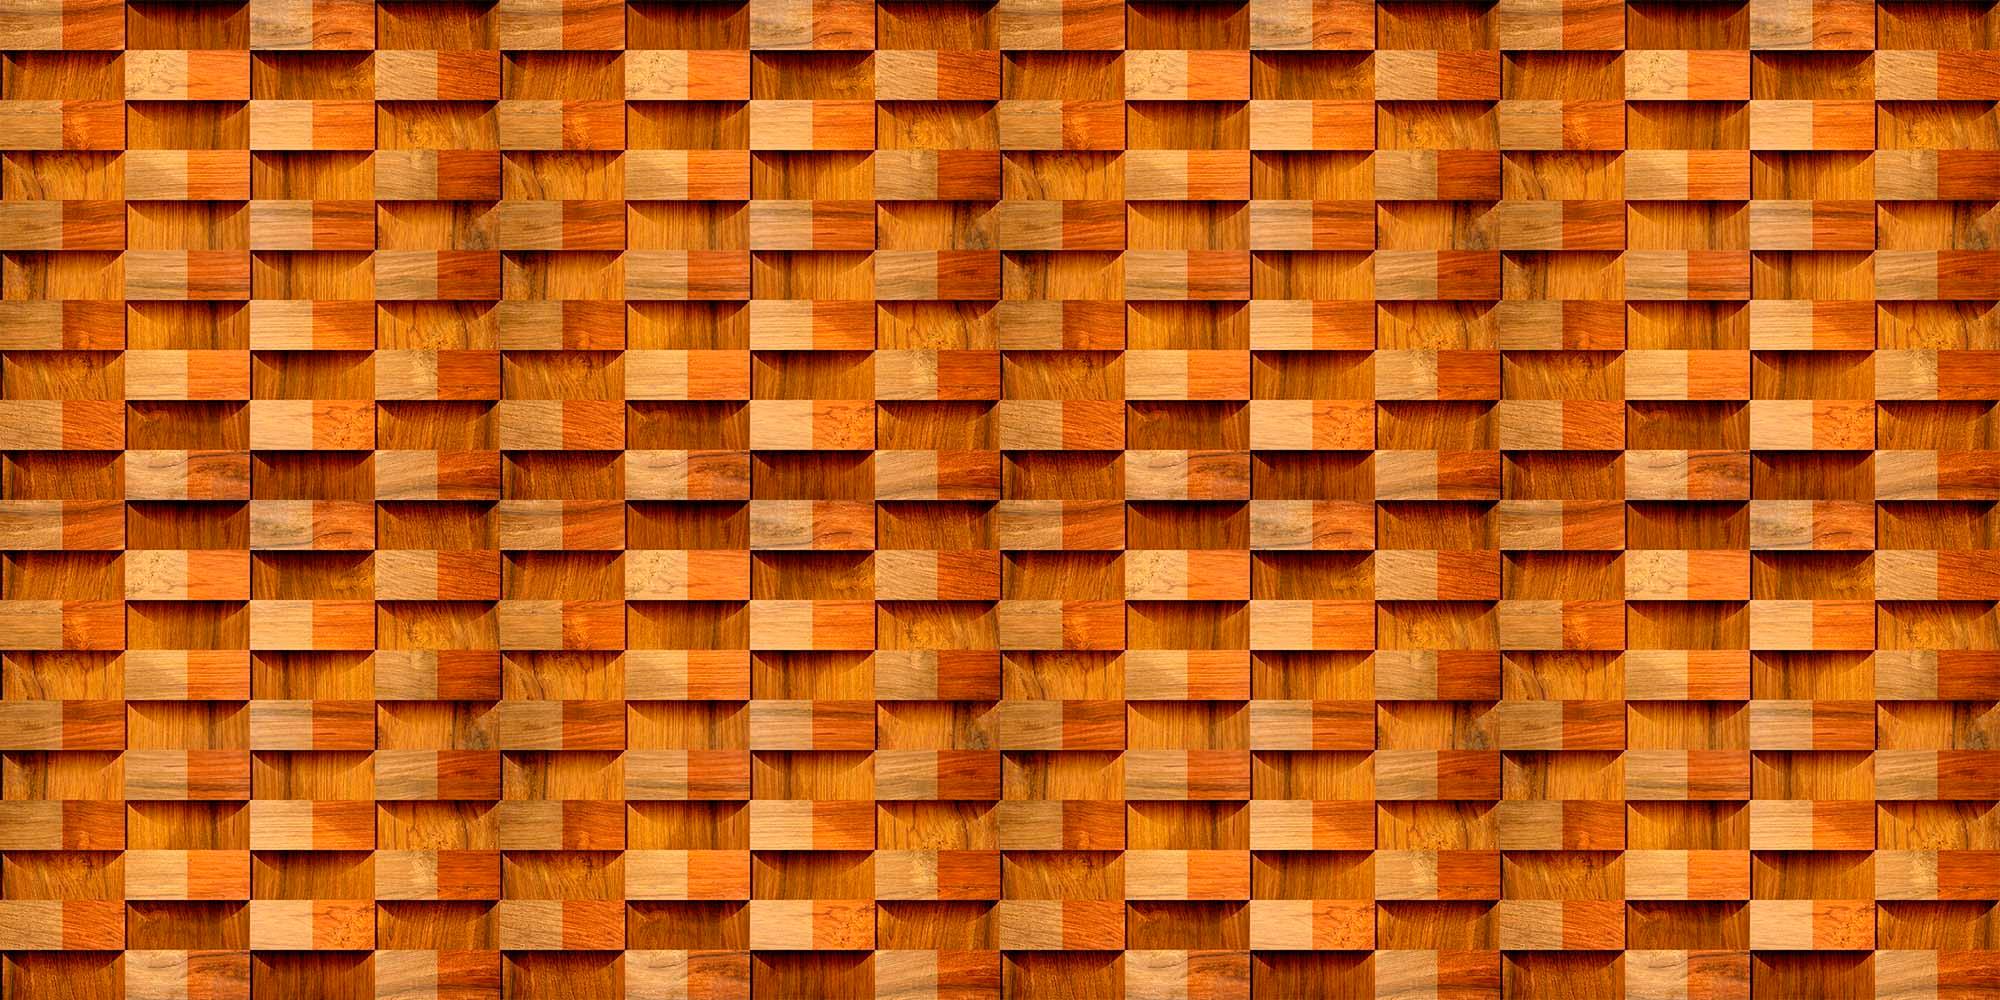 Abstract paneling pattern Wood decor wallpaper